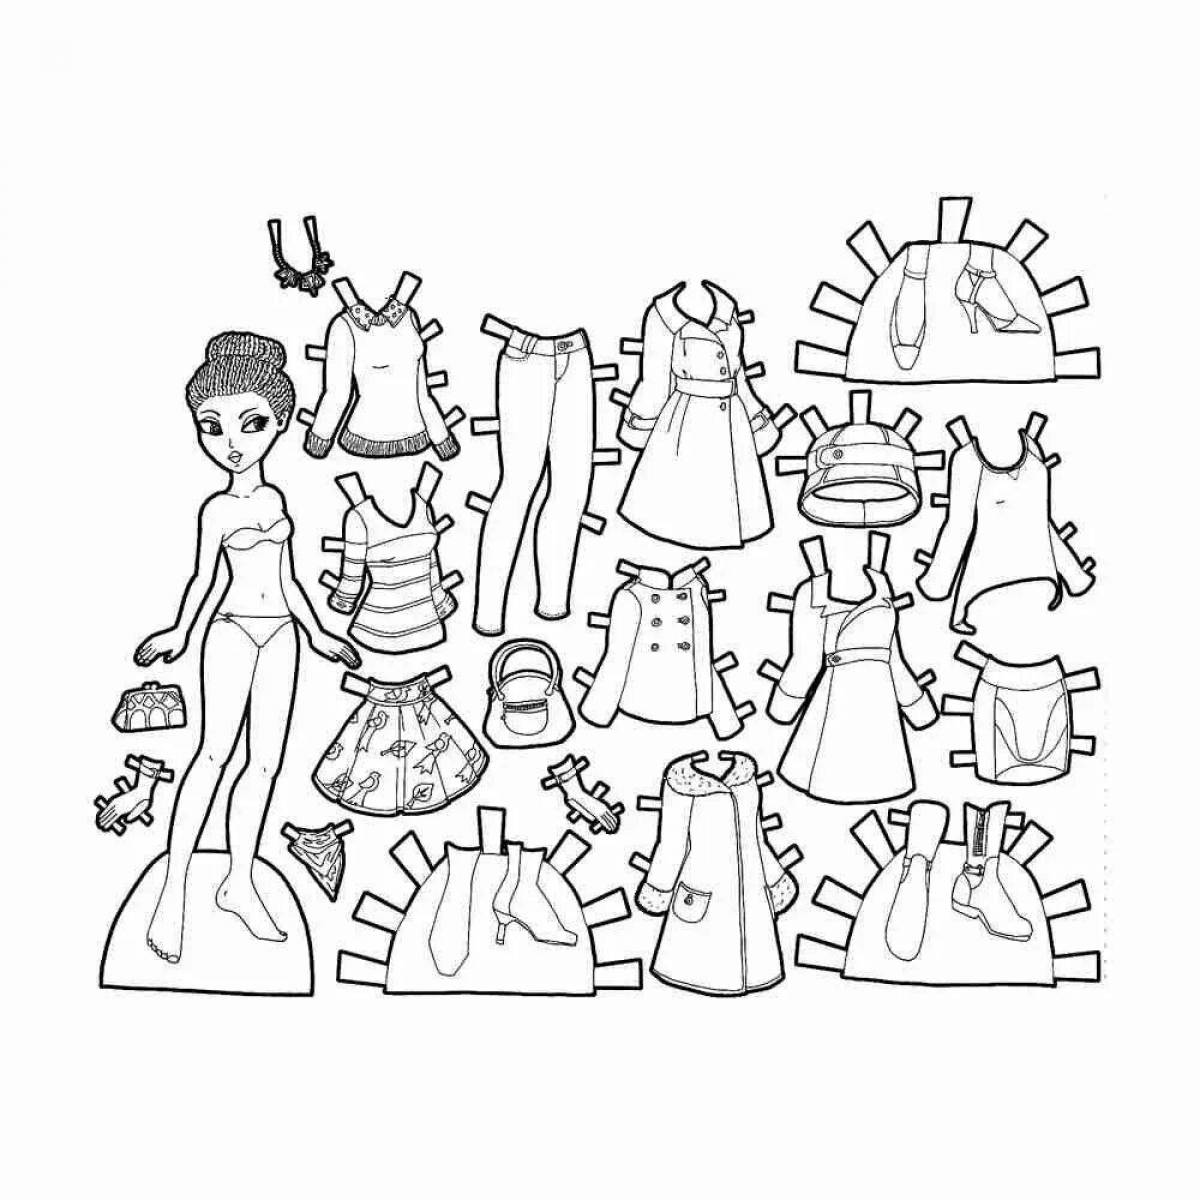 Fairy paper doll with clothes